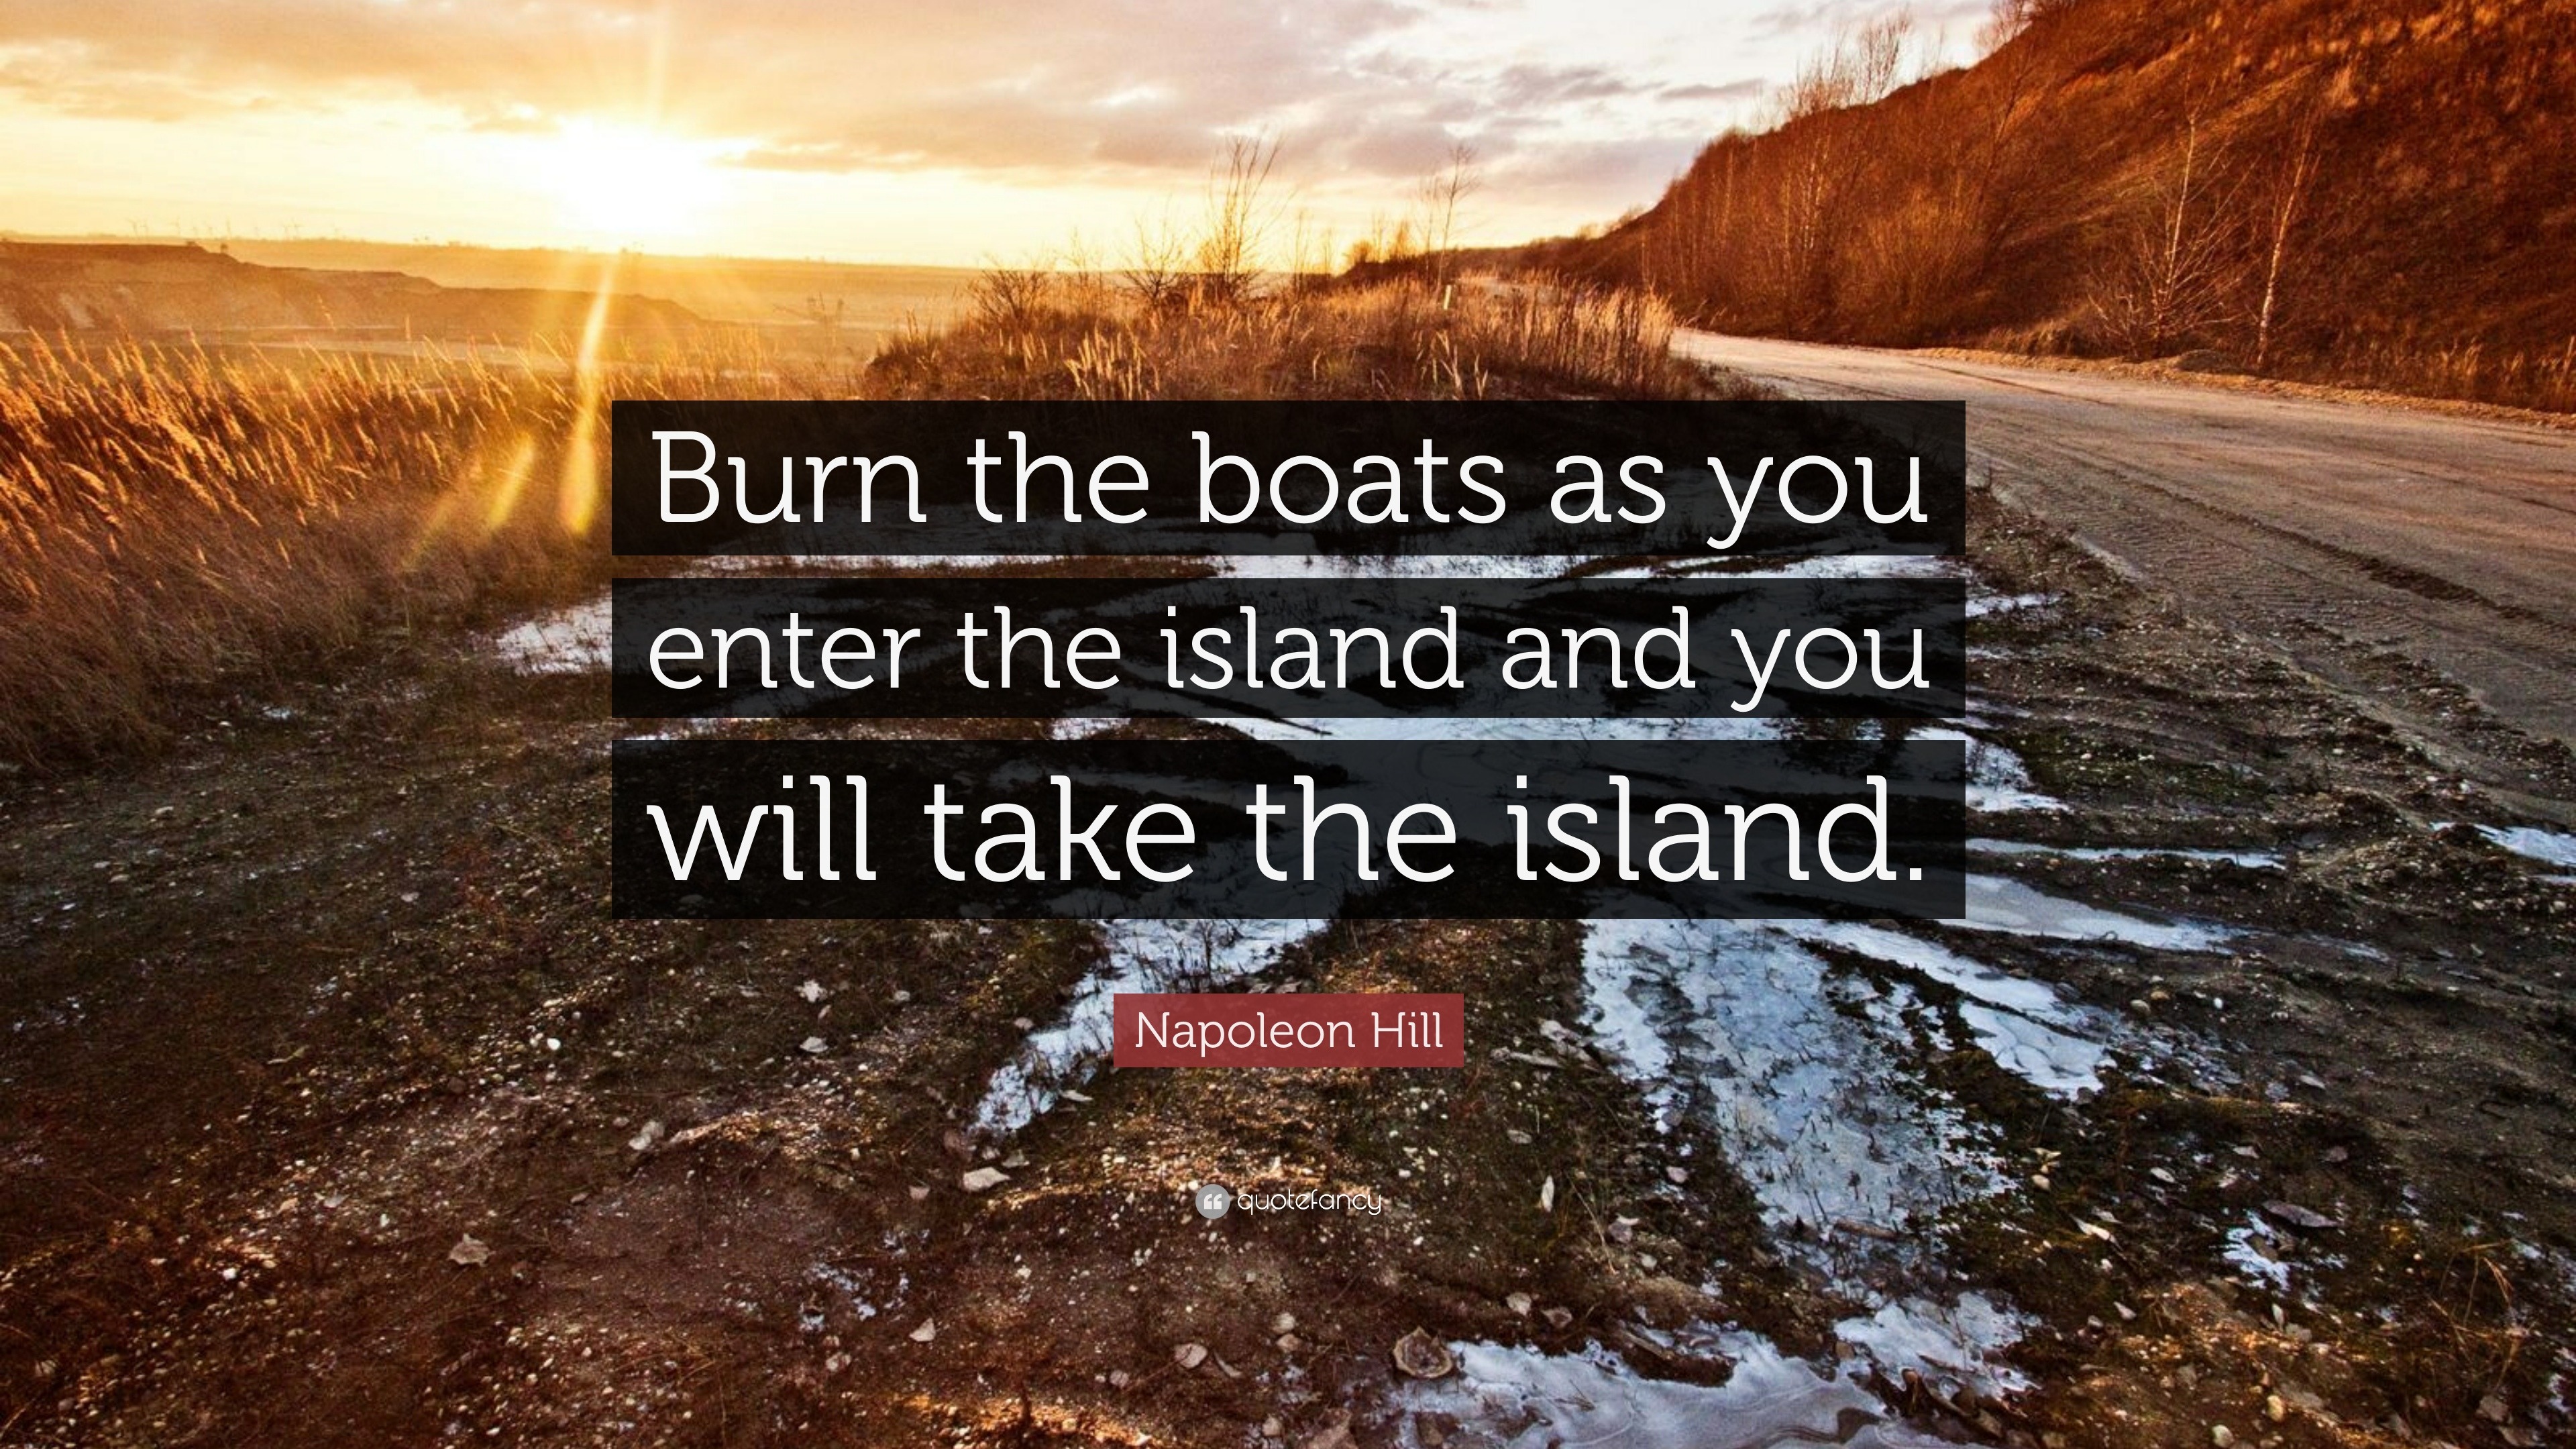 BURN THE SHIPS Happy New Year everyone May your 2018 be blessed  newyearseve burntheships youcanalwaysbeginagain  Warrior quotes  Boating quotes Burns